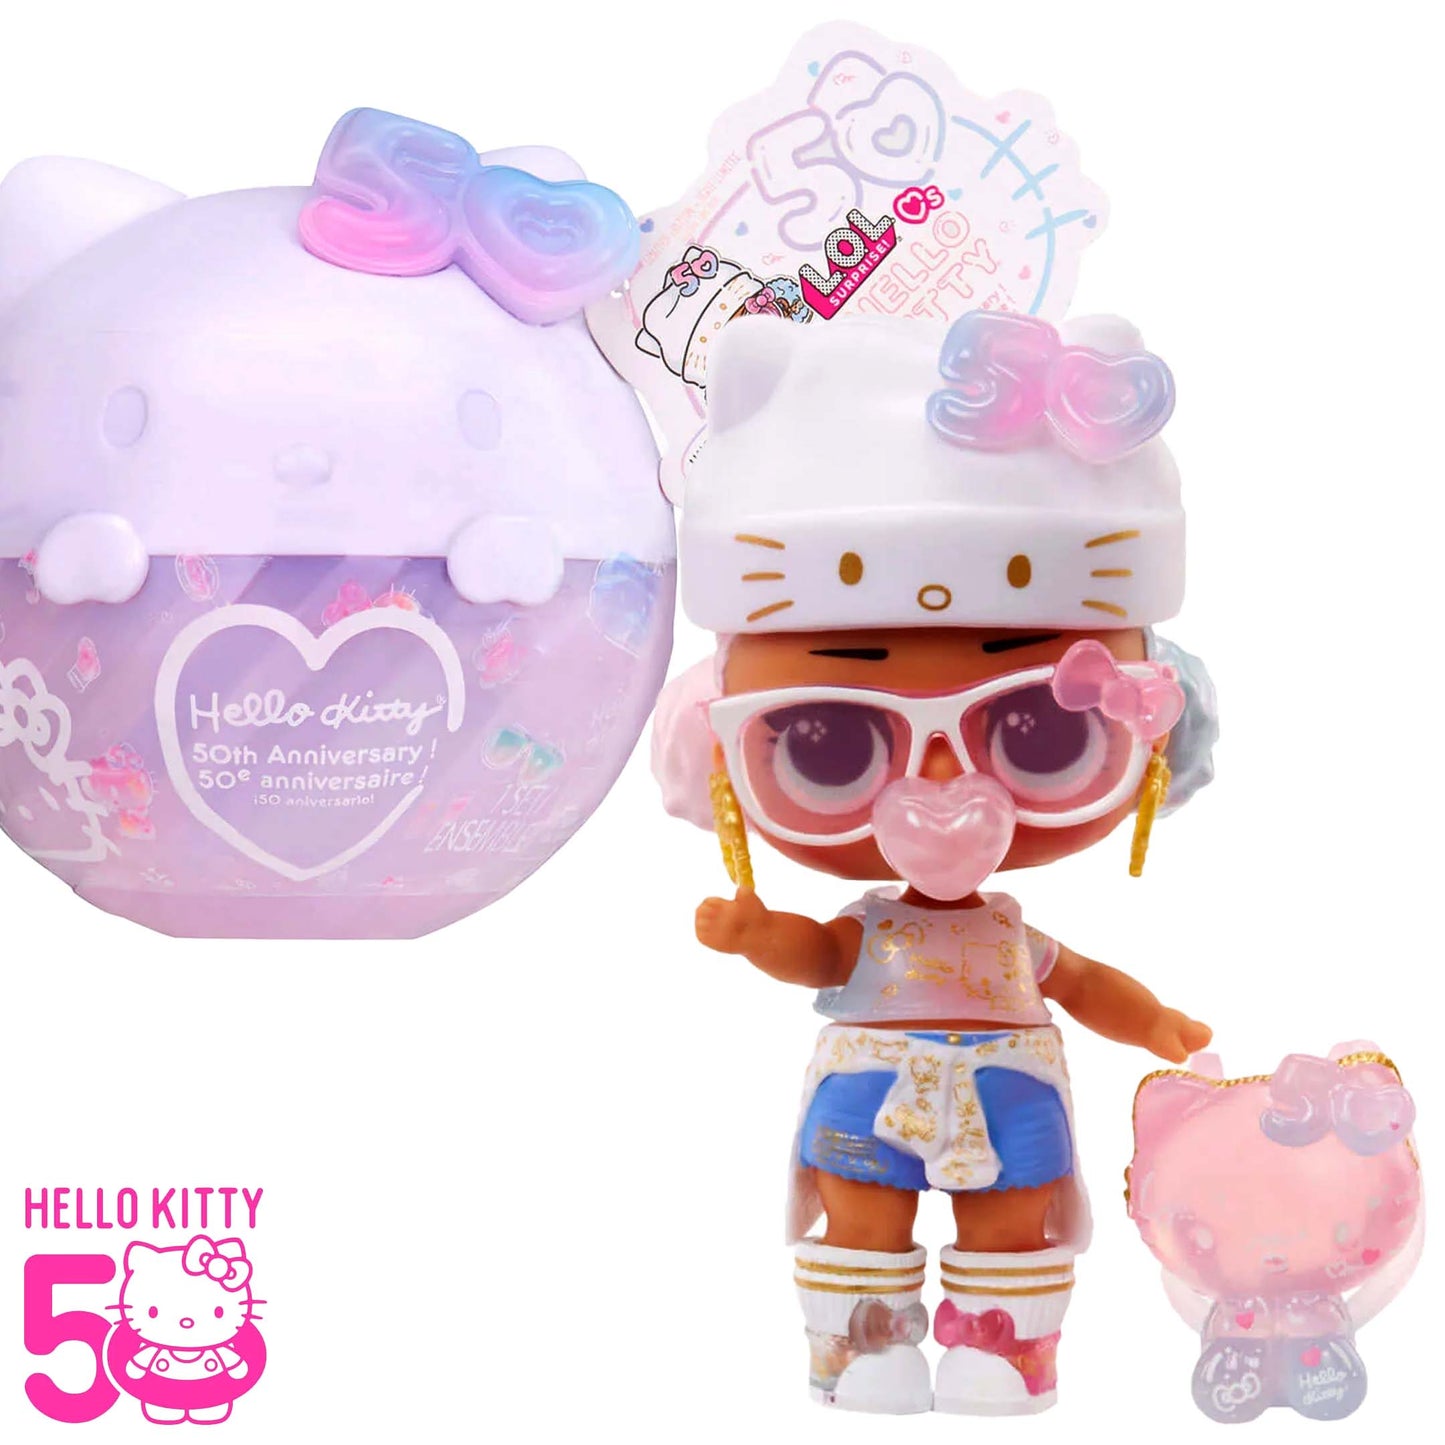 L.O.L. Surprise! Hello Kitty Limited Edition Dolls